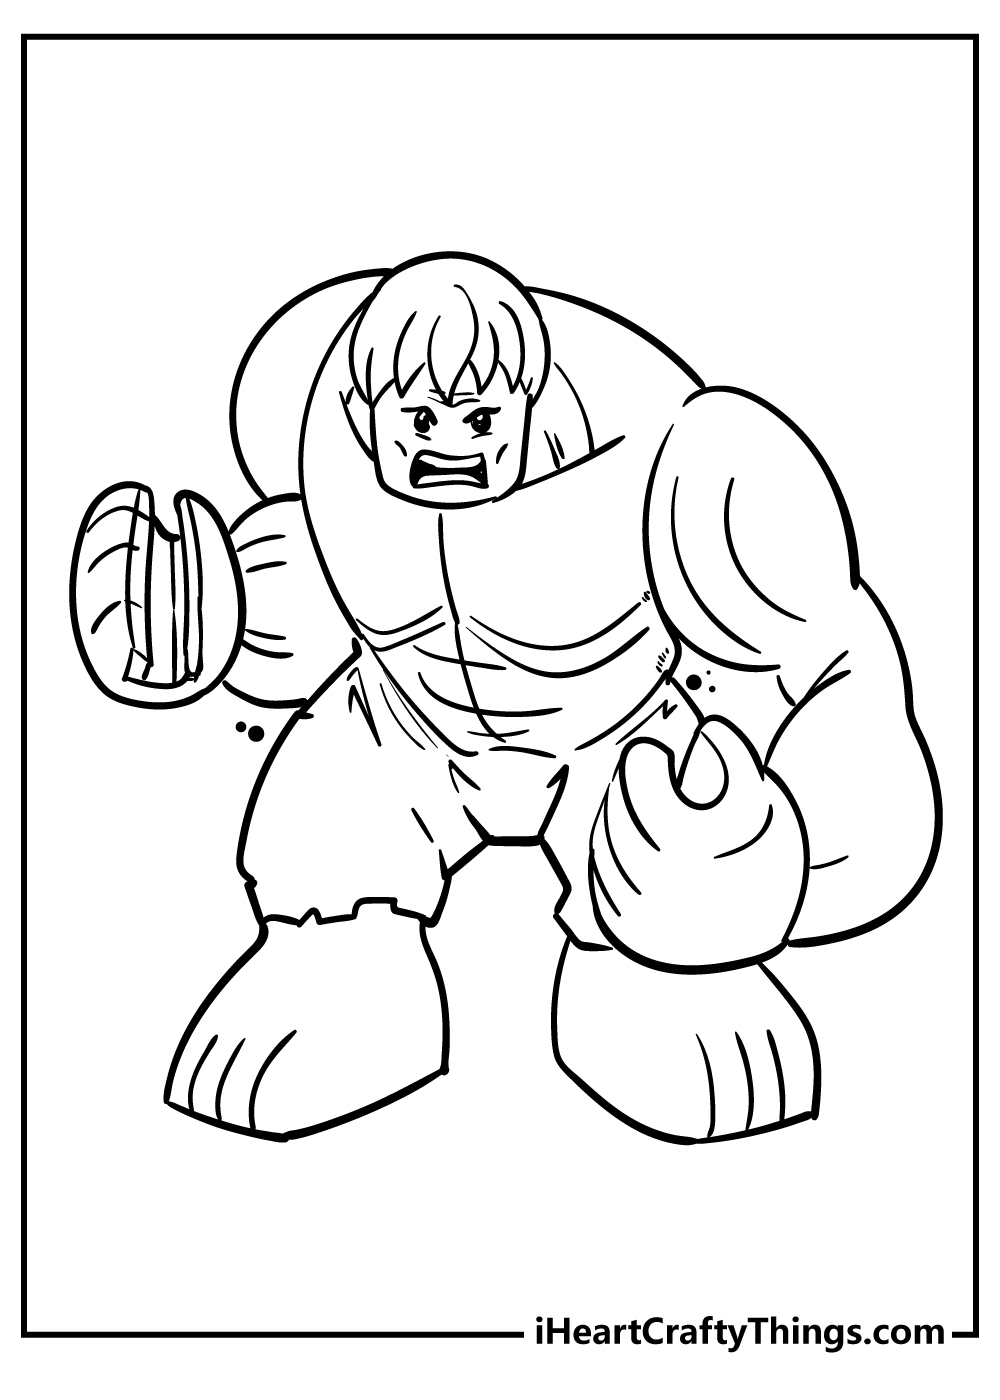 Lego Avengers Coloring Sheet for children free download